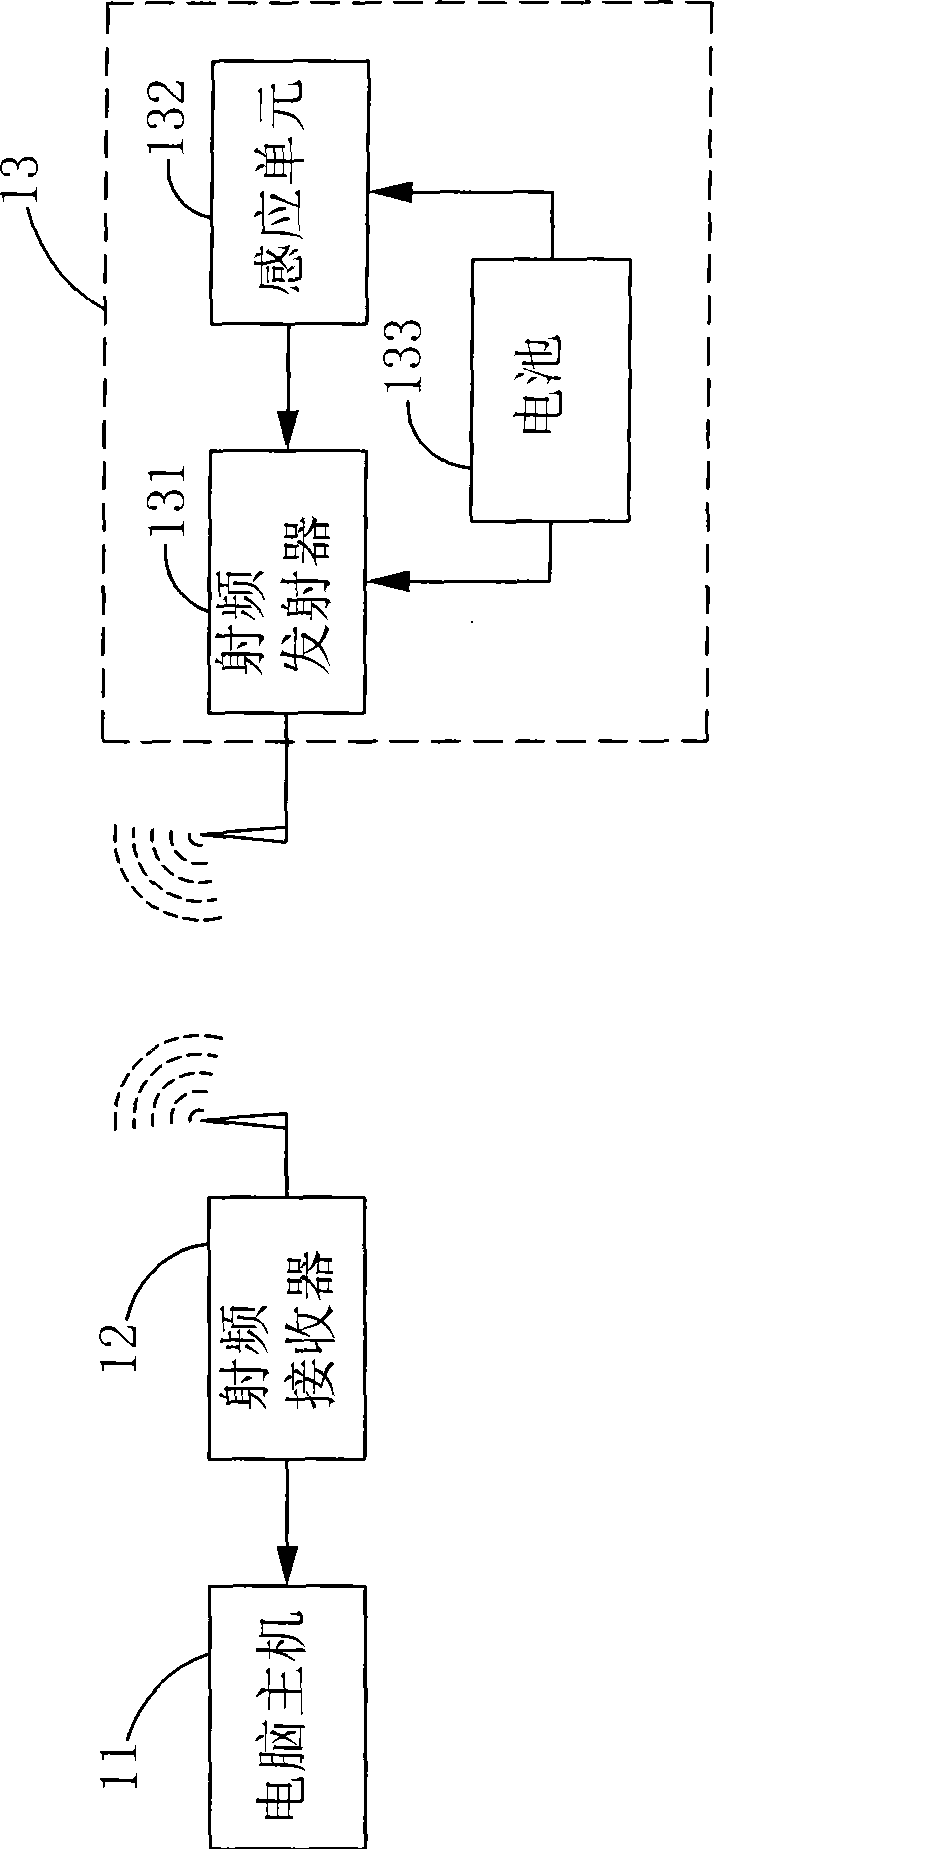 Electricity-saving wireless input apparatus and system